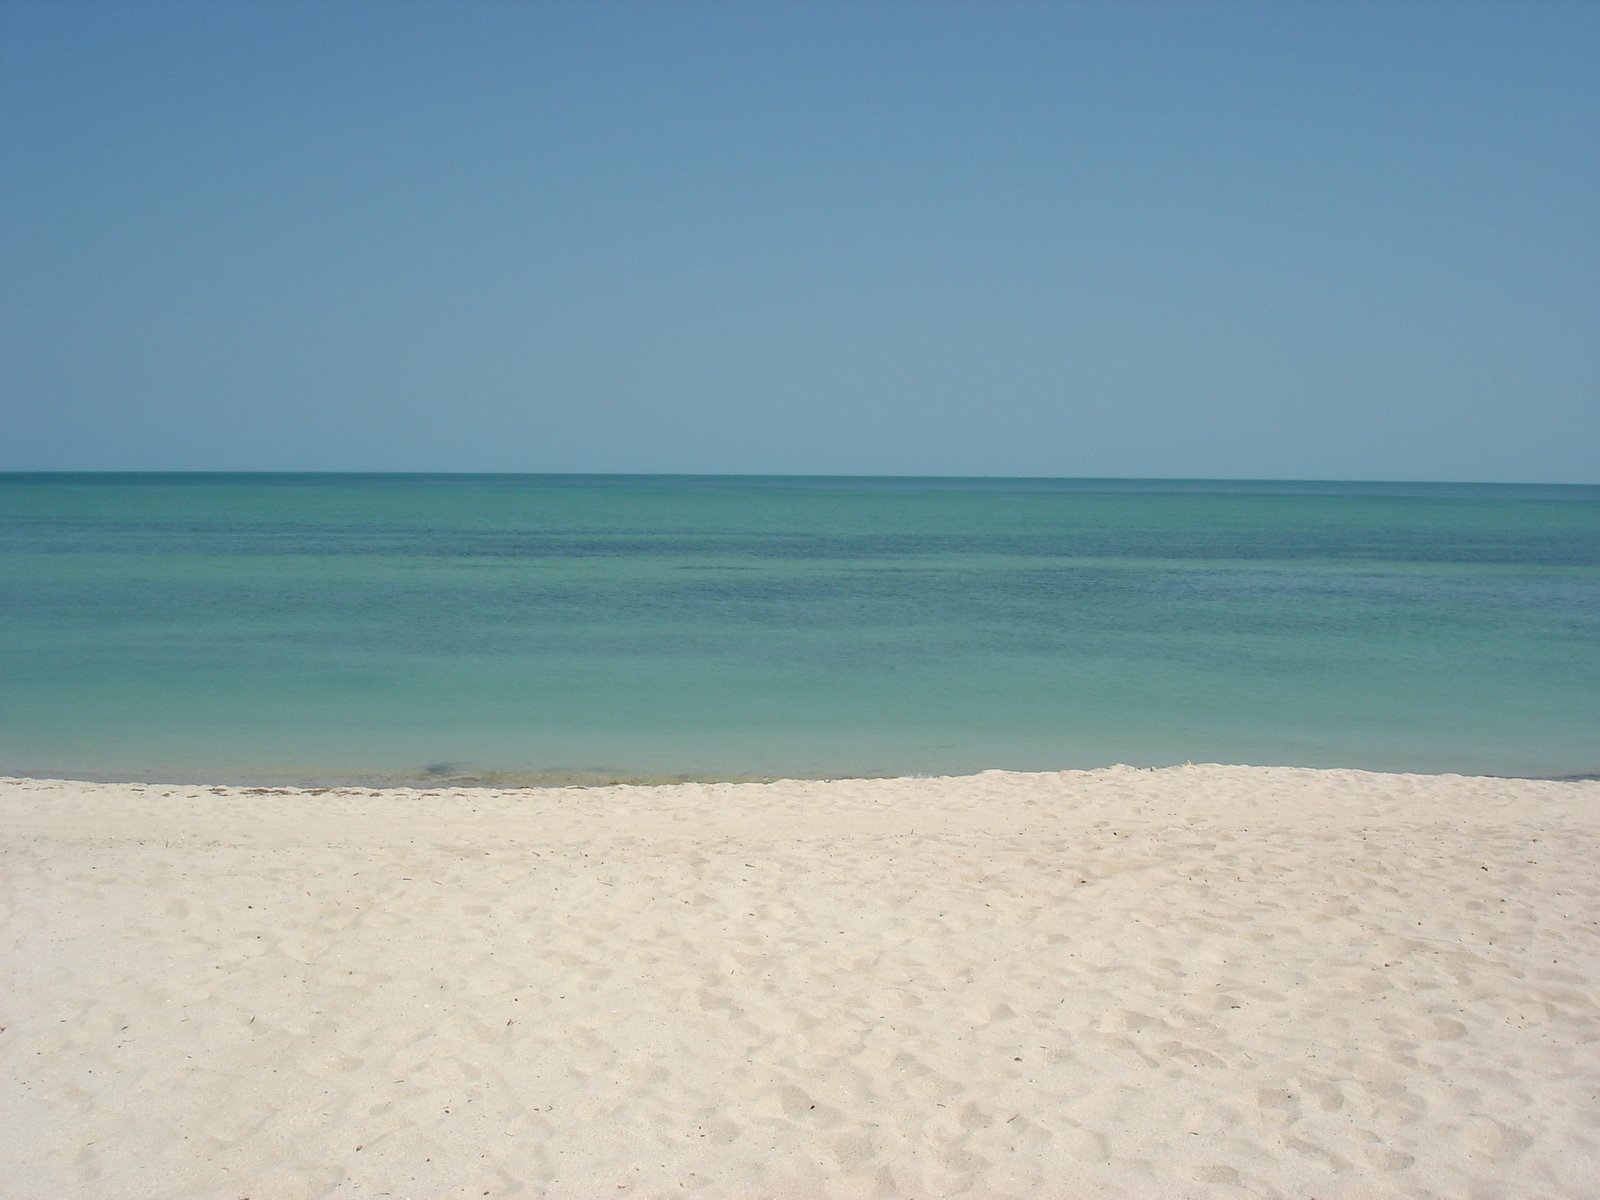 a picture of a beach with blue ocean in the background